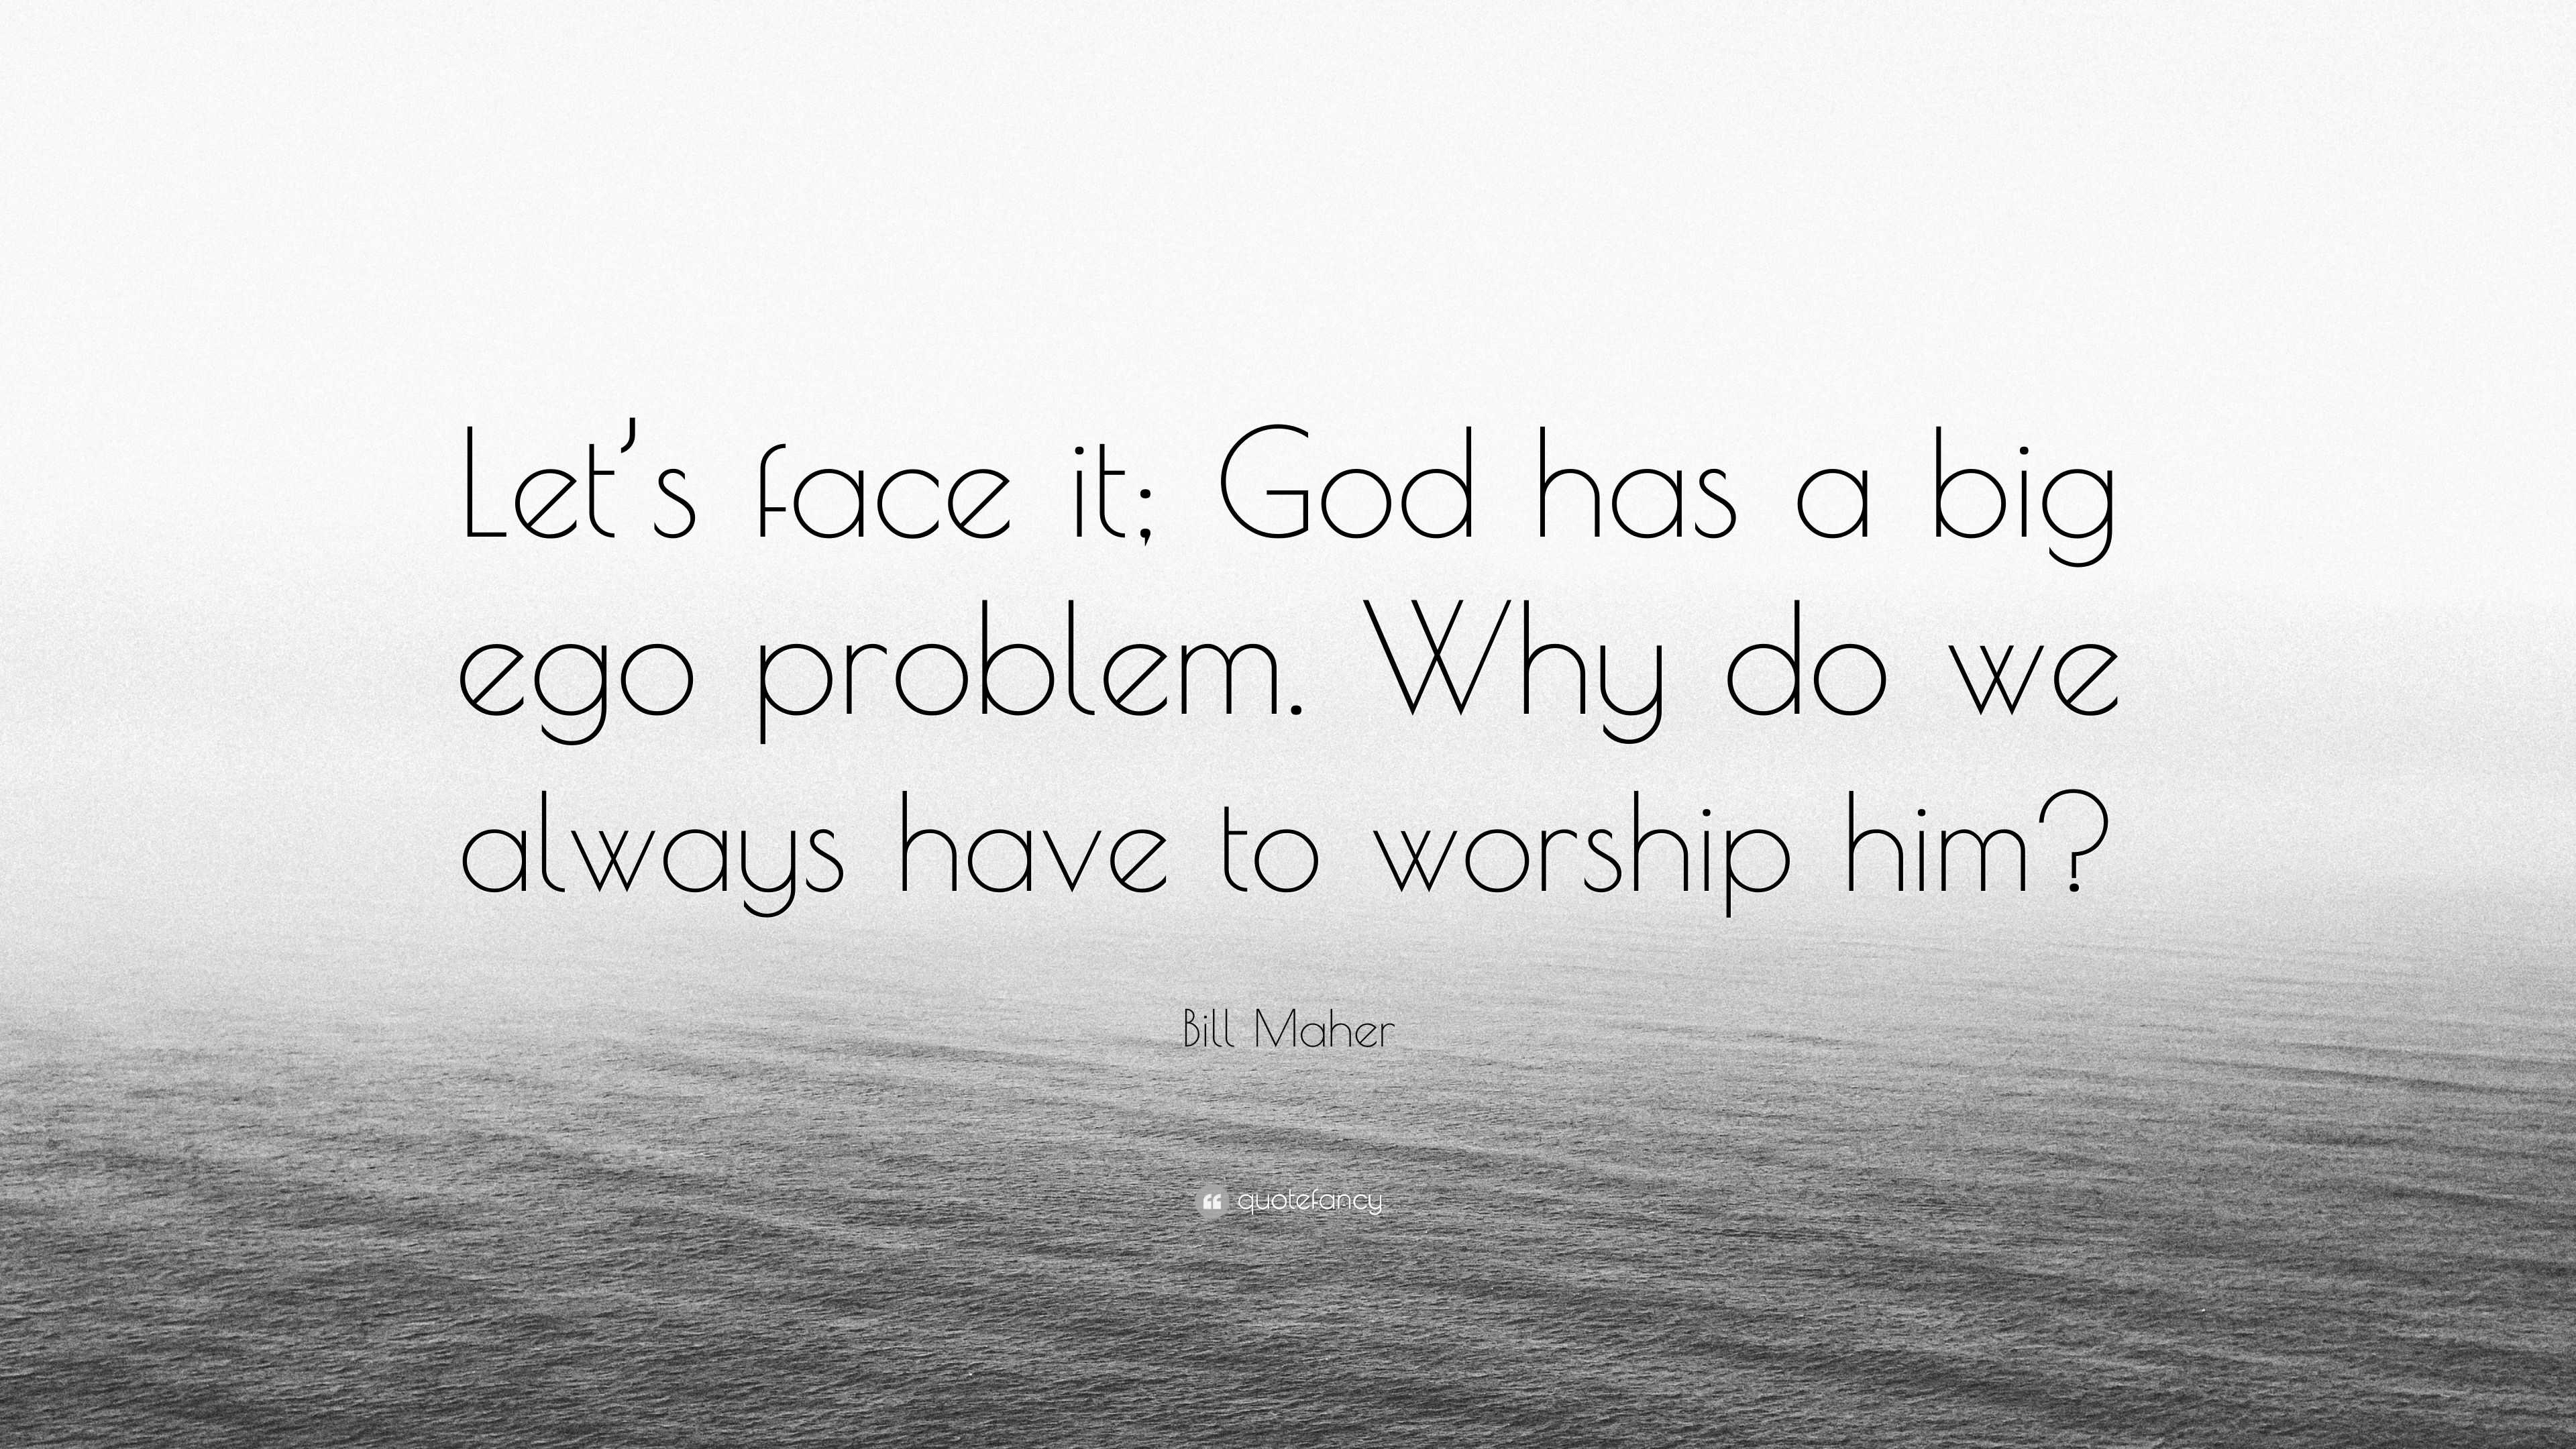 Bill Maher Quote Let S Face It God Has A Big Ego Problem Why Do We Always